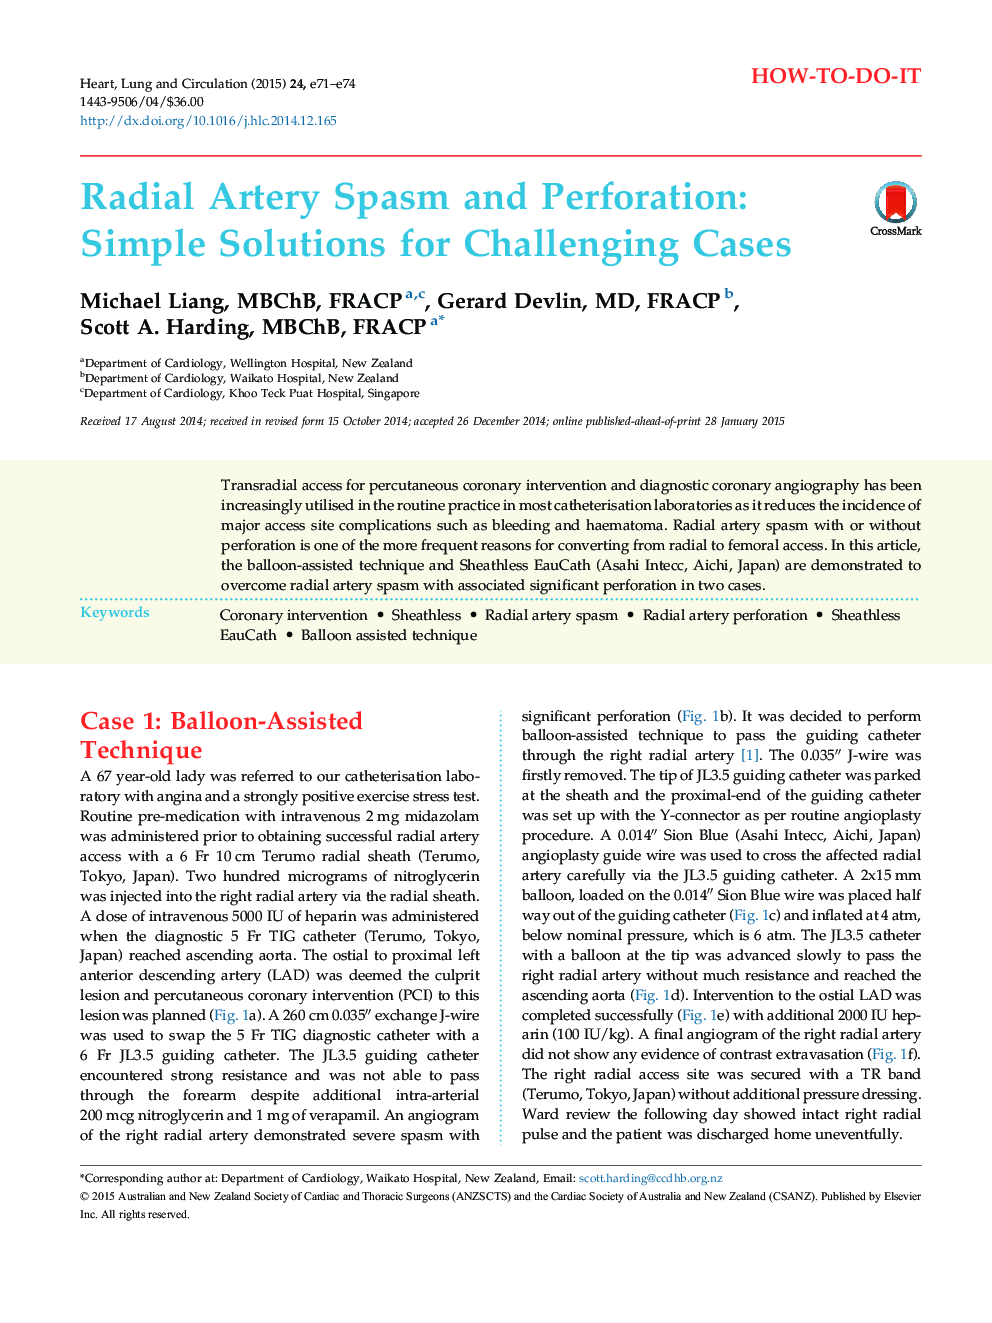 Radial Artery Spasm and Perforation: Simple Solutions for Challenging Cases